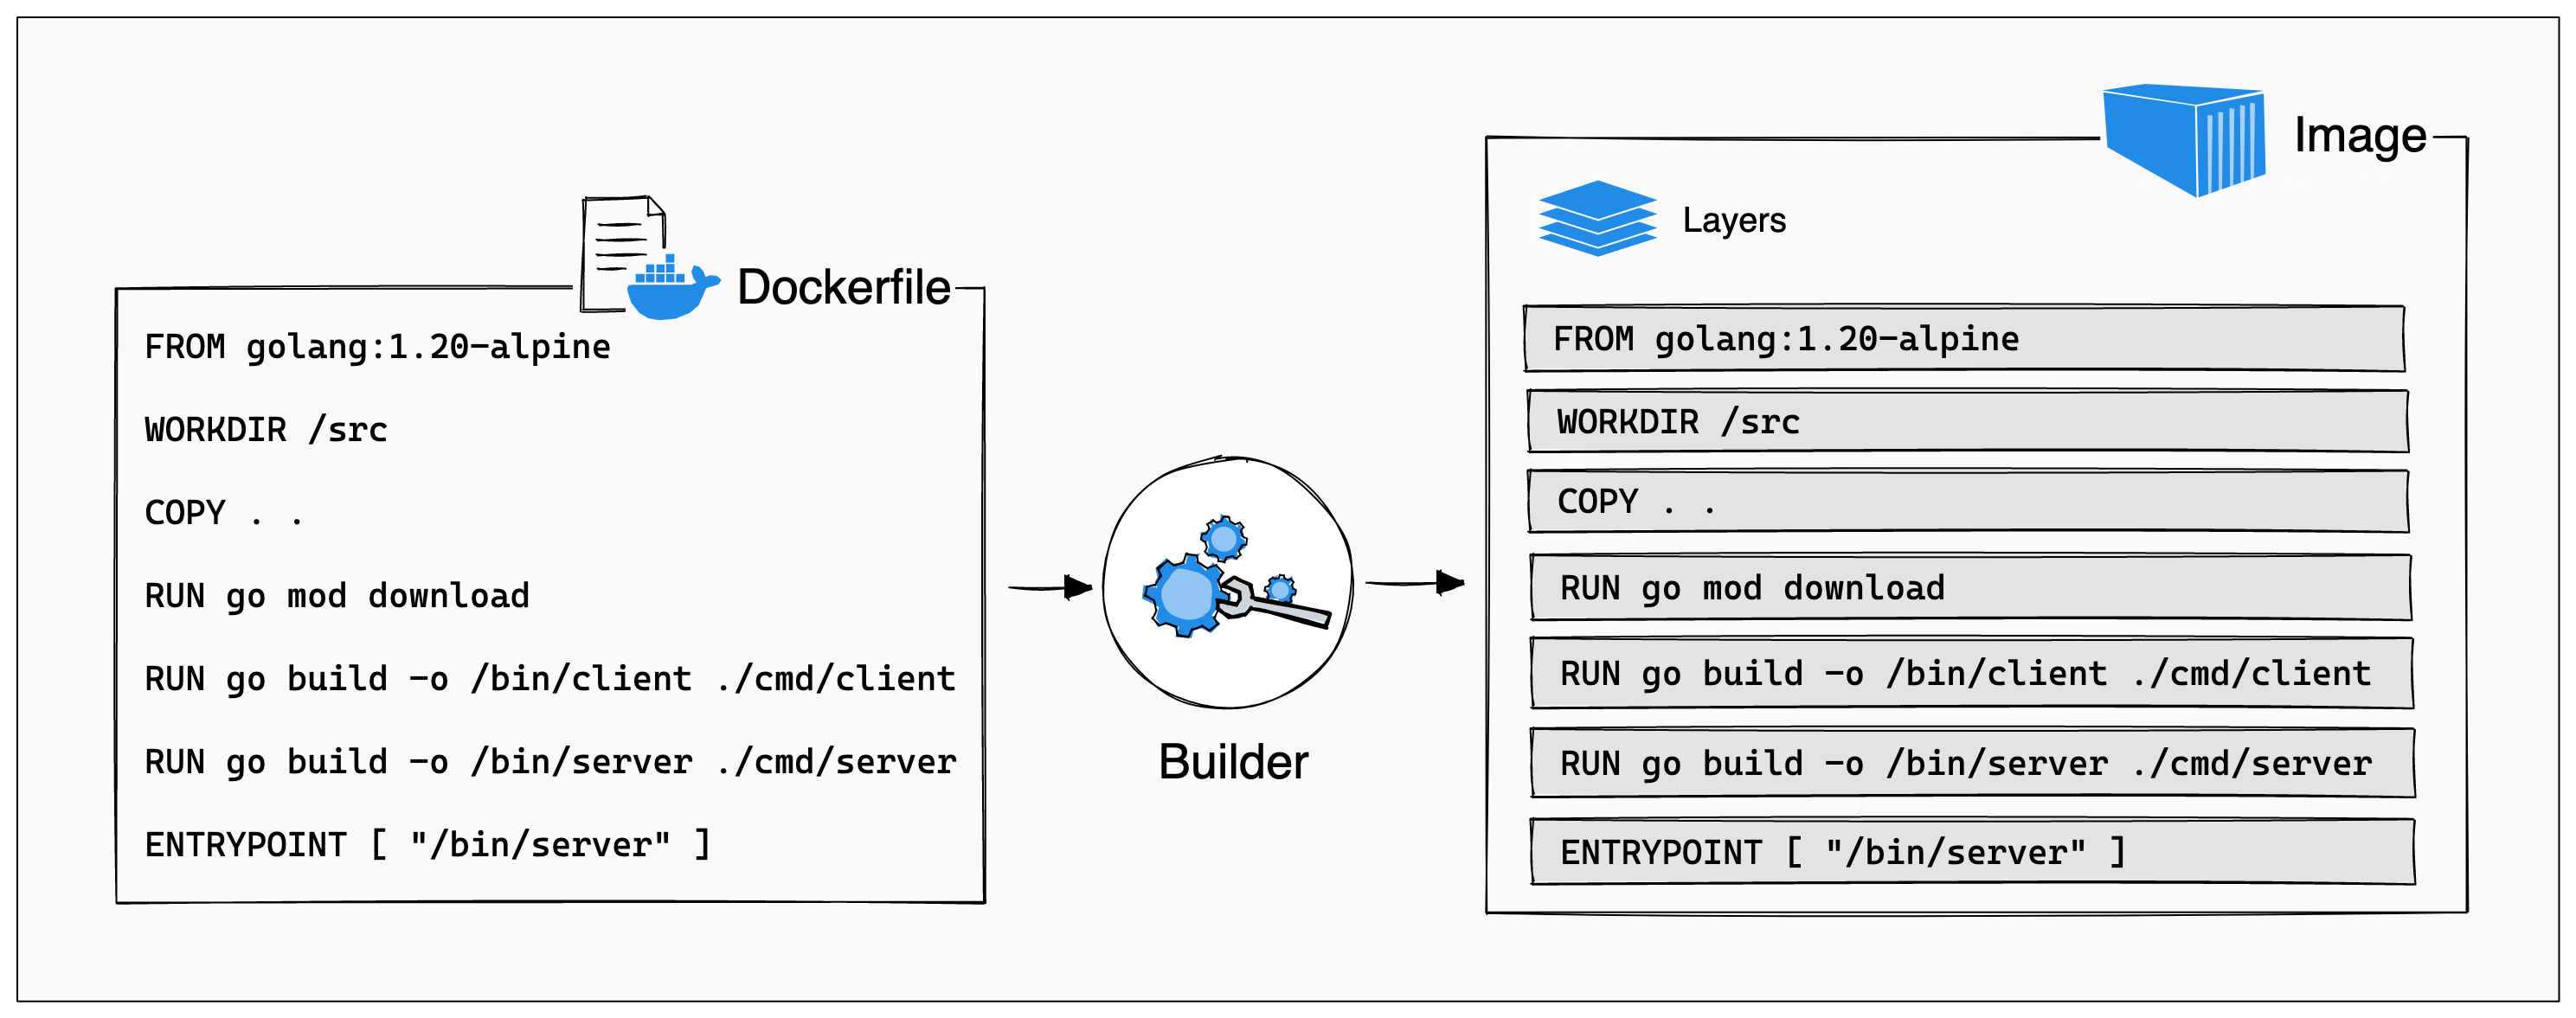 From Dockerfile to layers